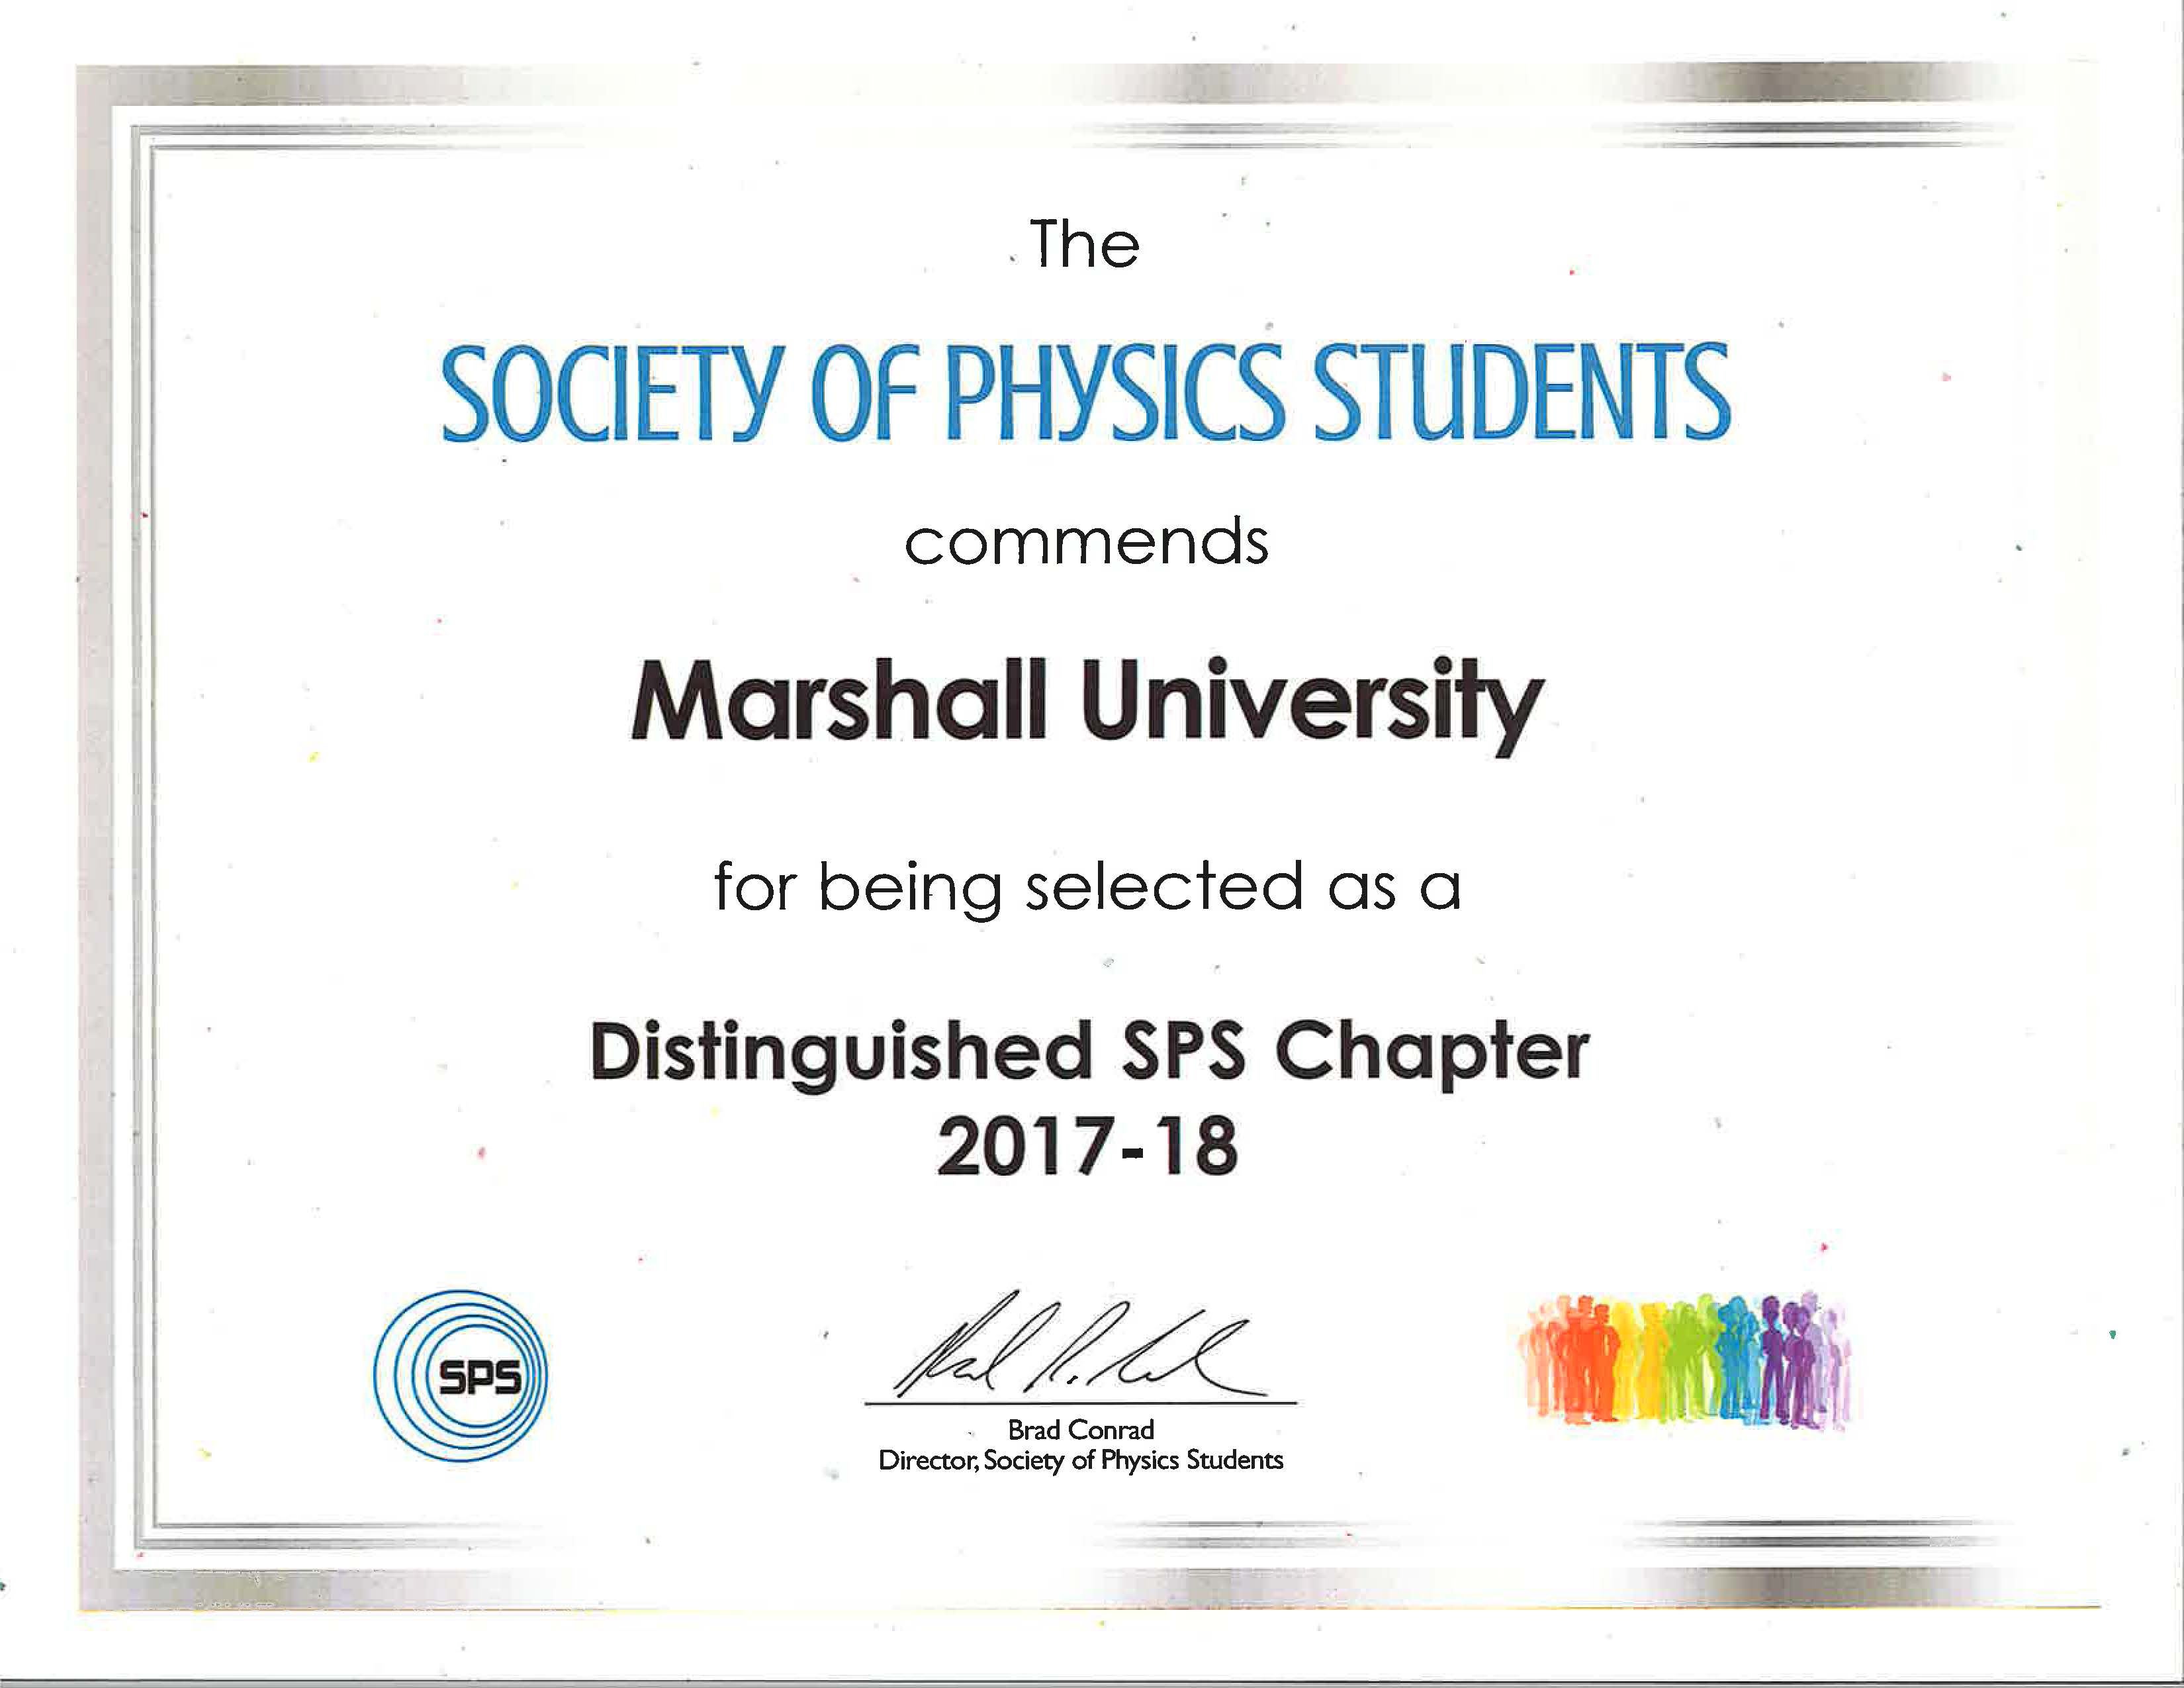 Society of Physics Students Distinguished Chapter award given to Marshall University chapter for 2017-2018